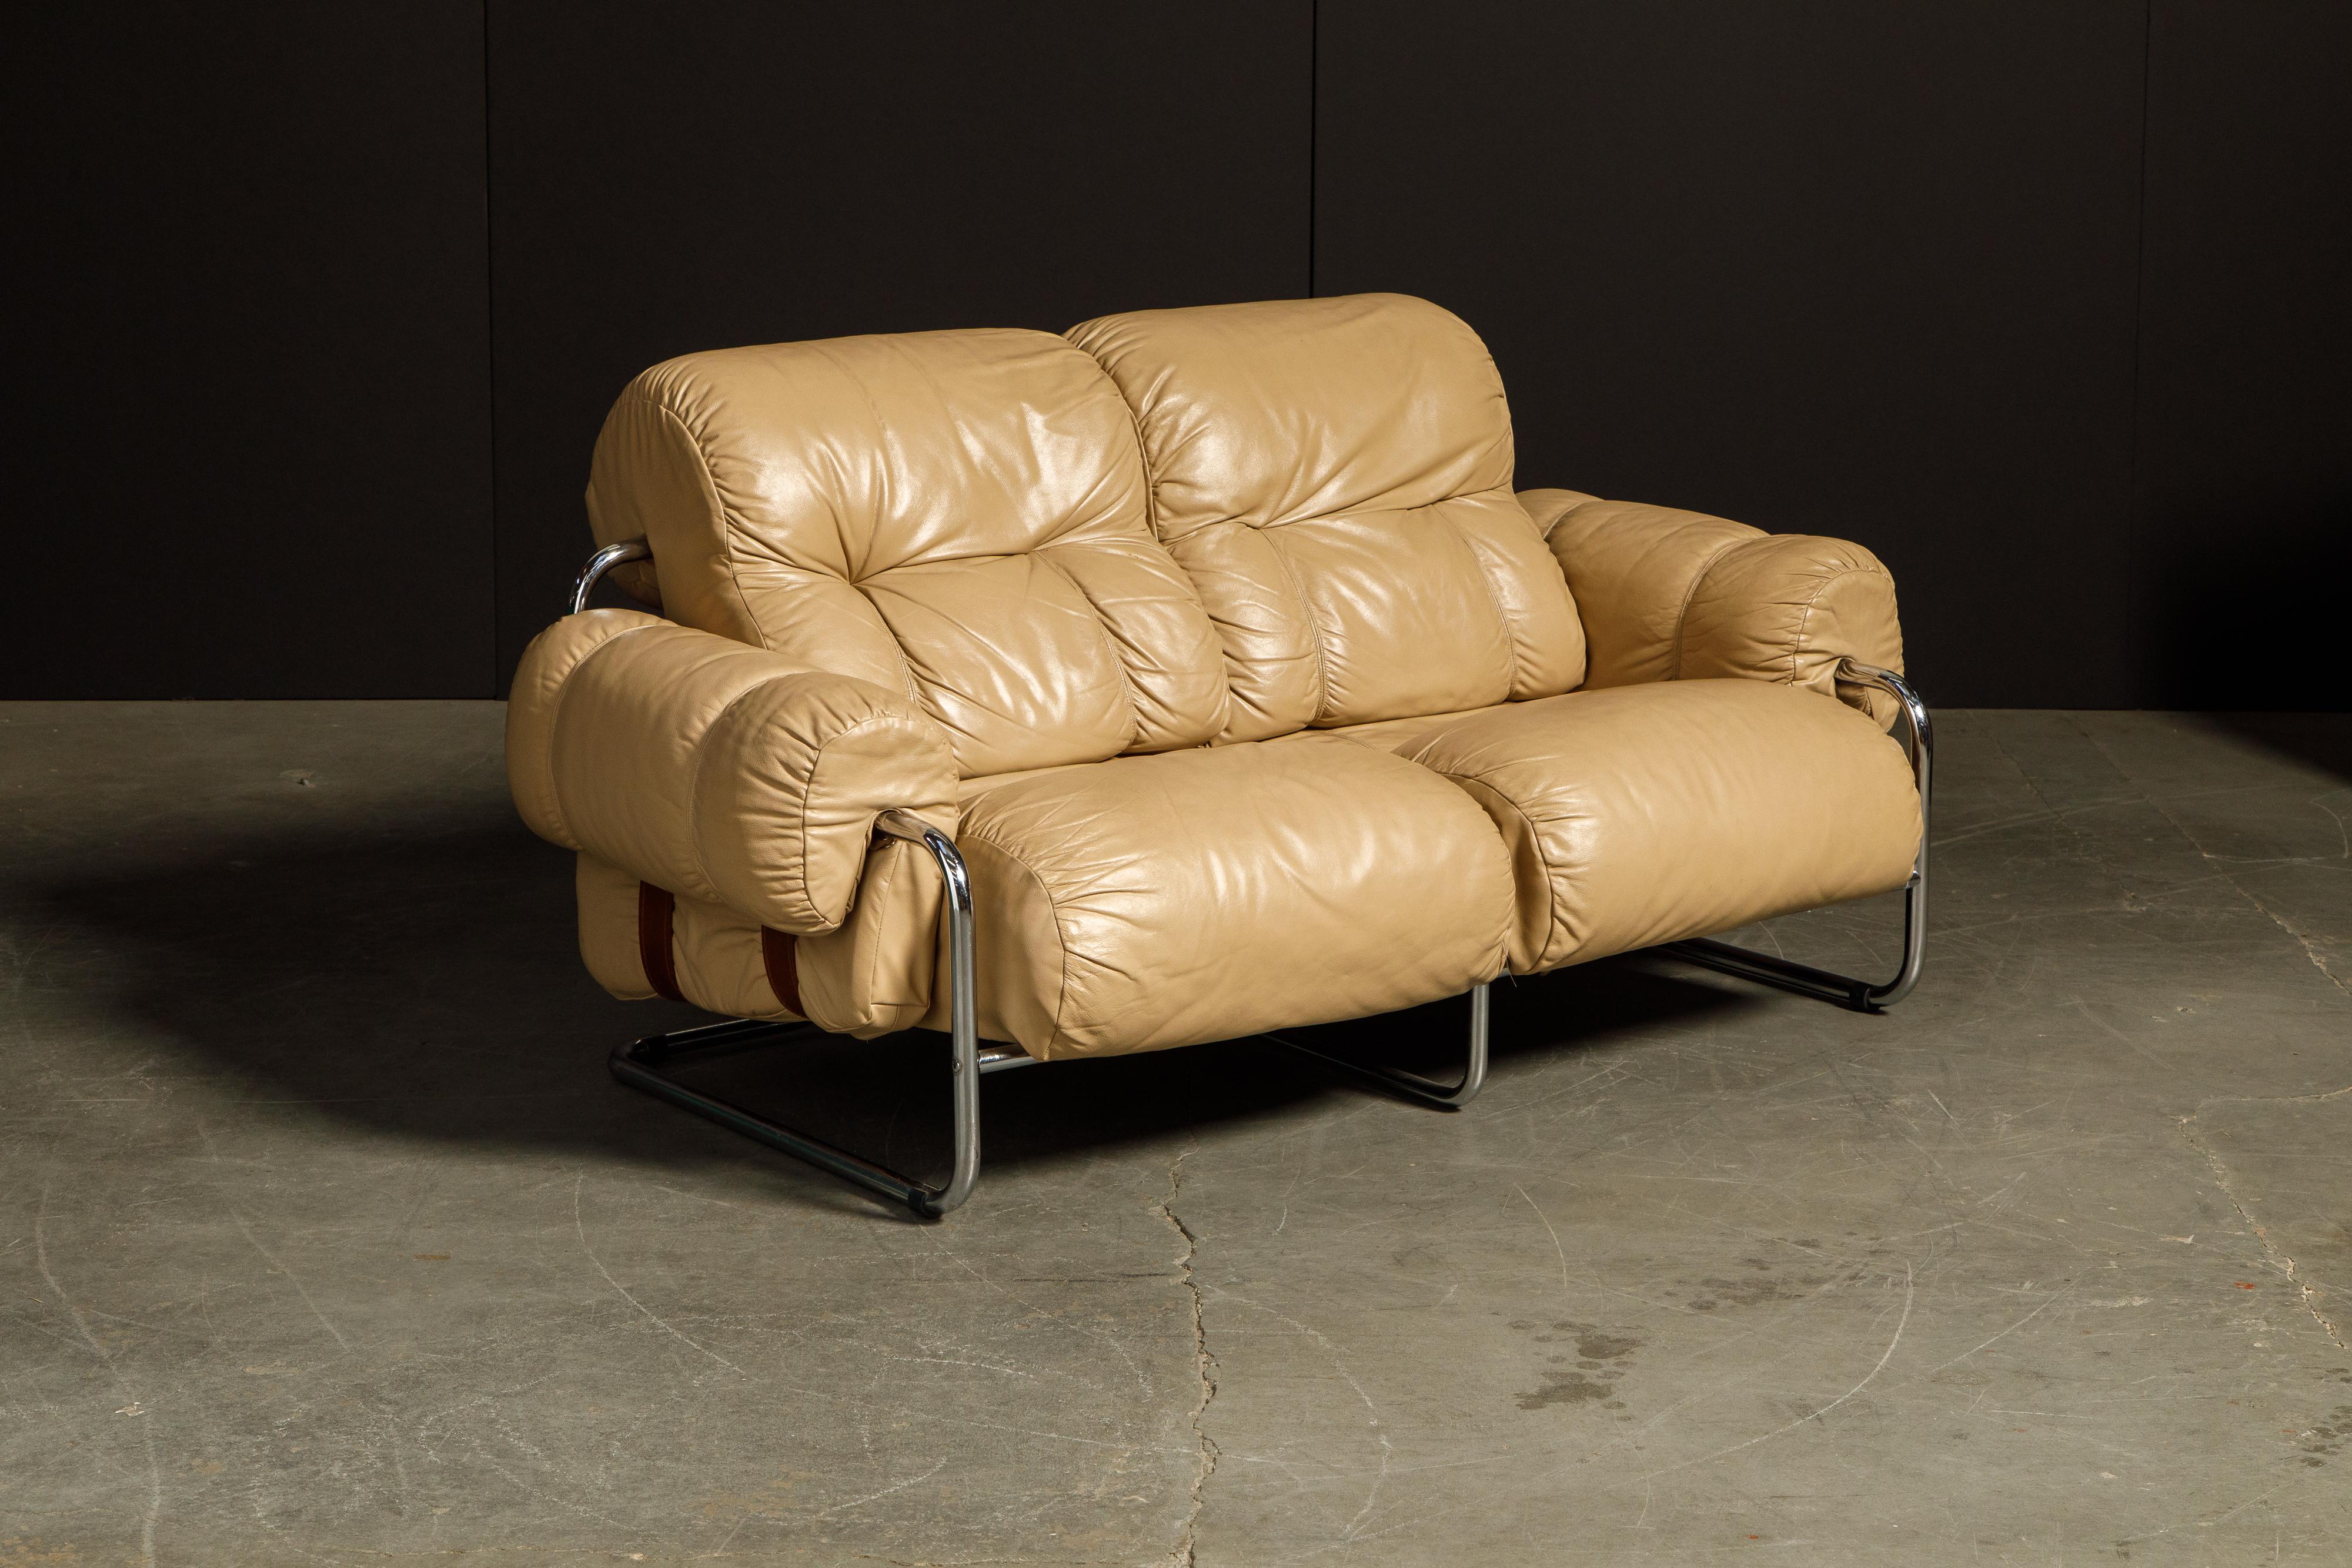 Modern 'Tucroma' Leather Sofa and Loveseat by Guido Faleschini for Mariani, 1970s Italy